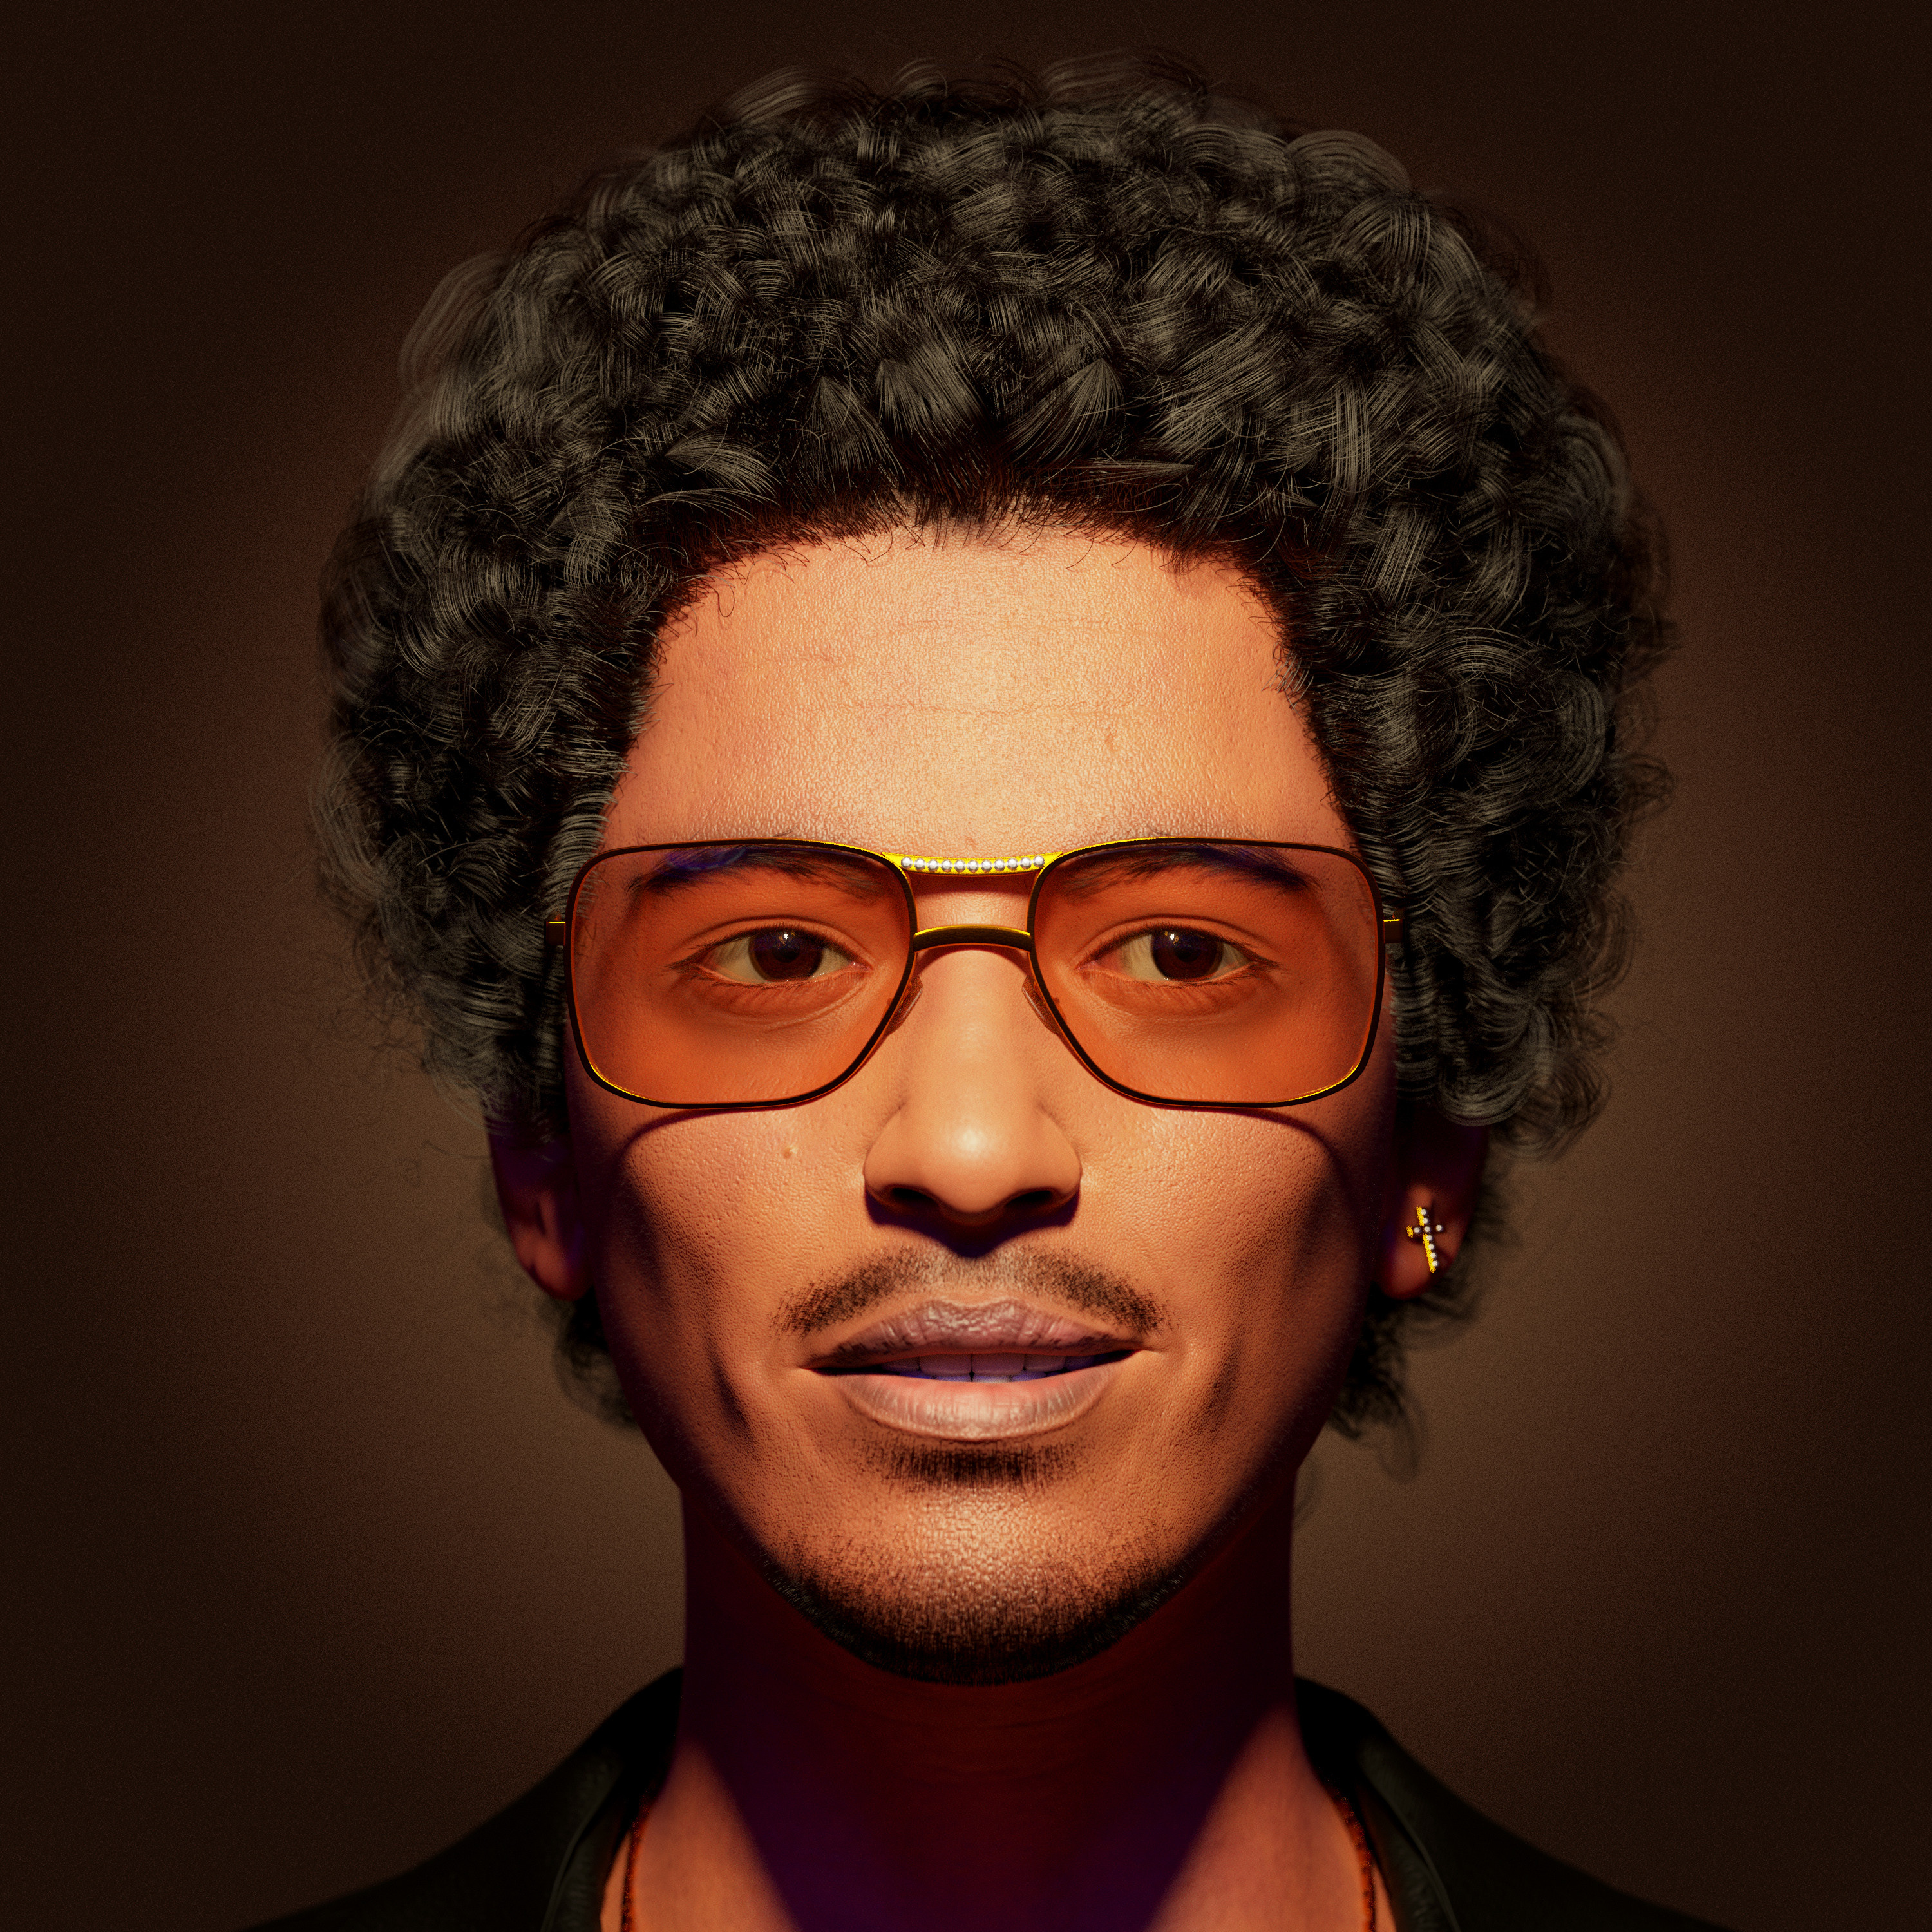 My attempt on Bruno Mars 3d portrait. Likeness is a challenge for me but I feel that this piece was a breakthrough.